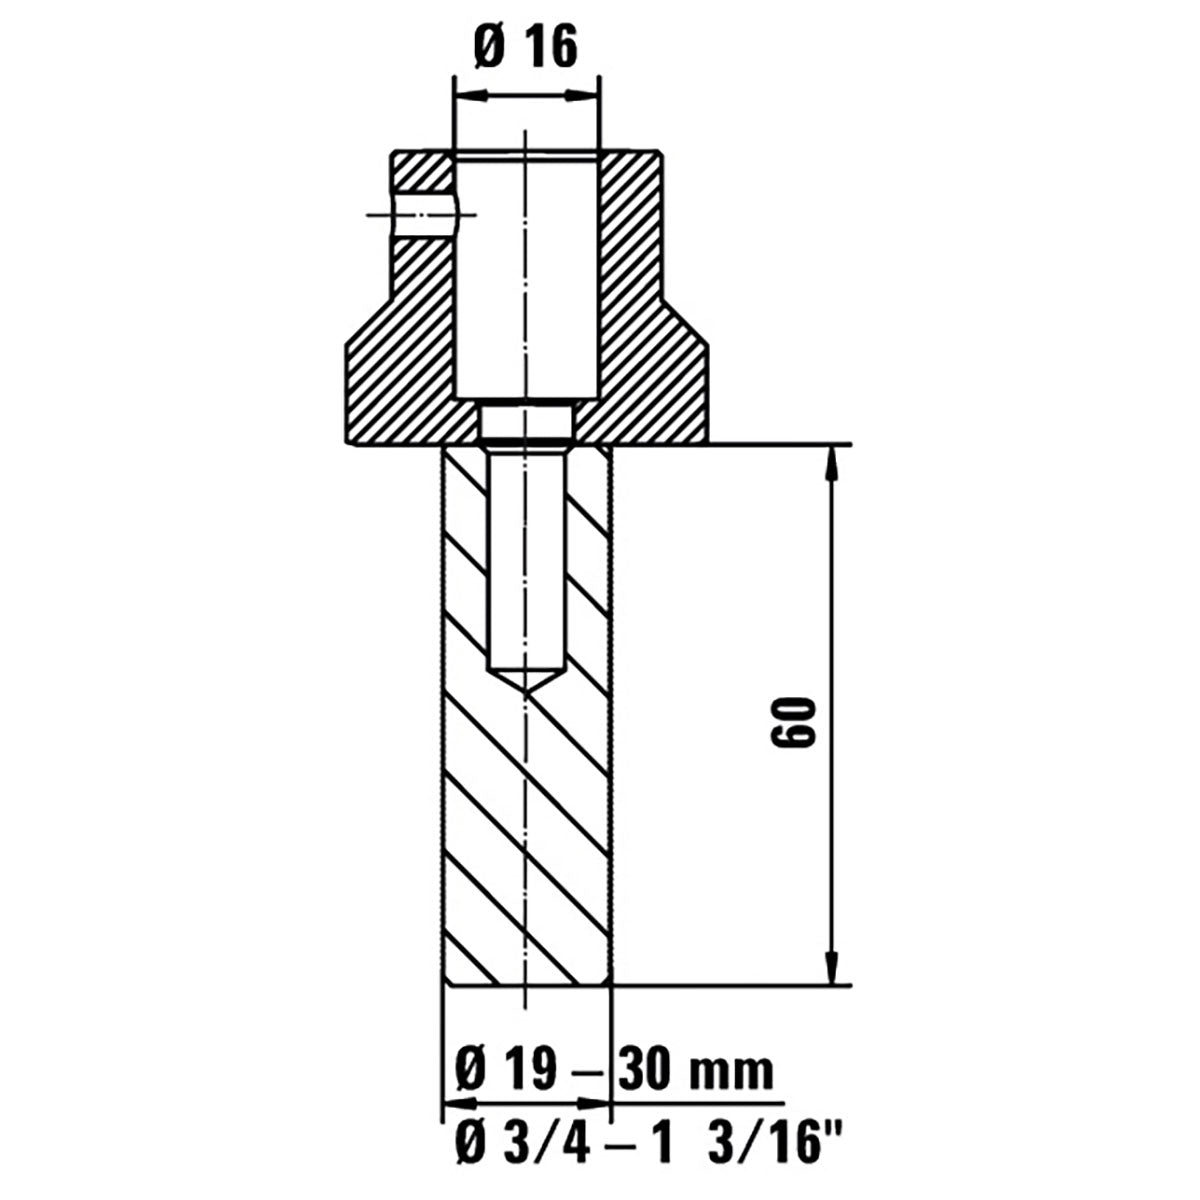 Bessey TW16AW30 - Adapter for Bessey TW16AW30 fasteners